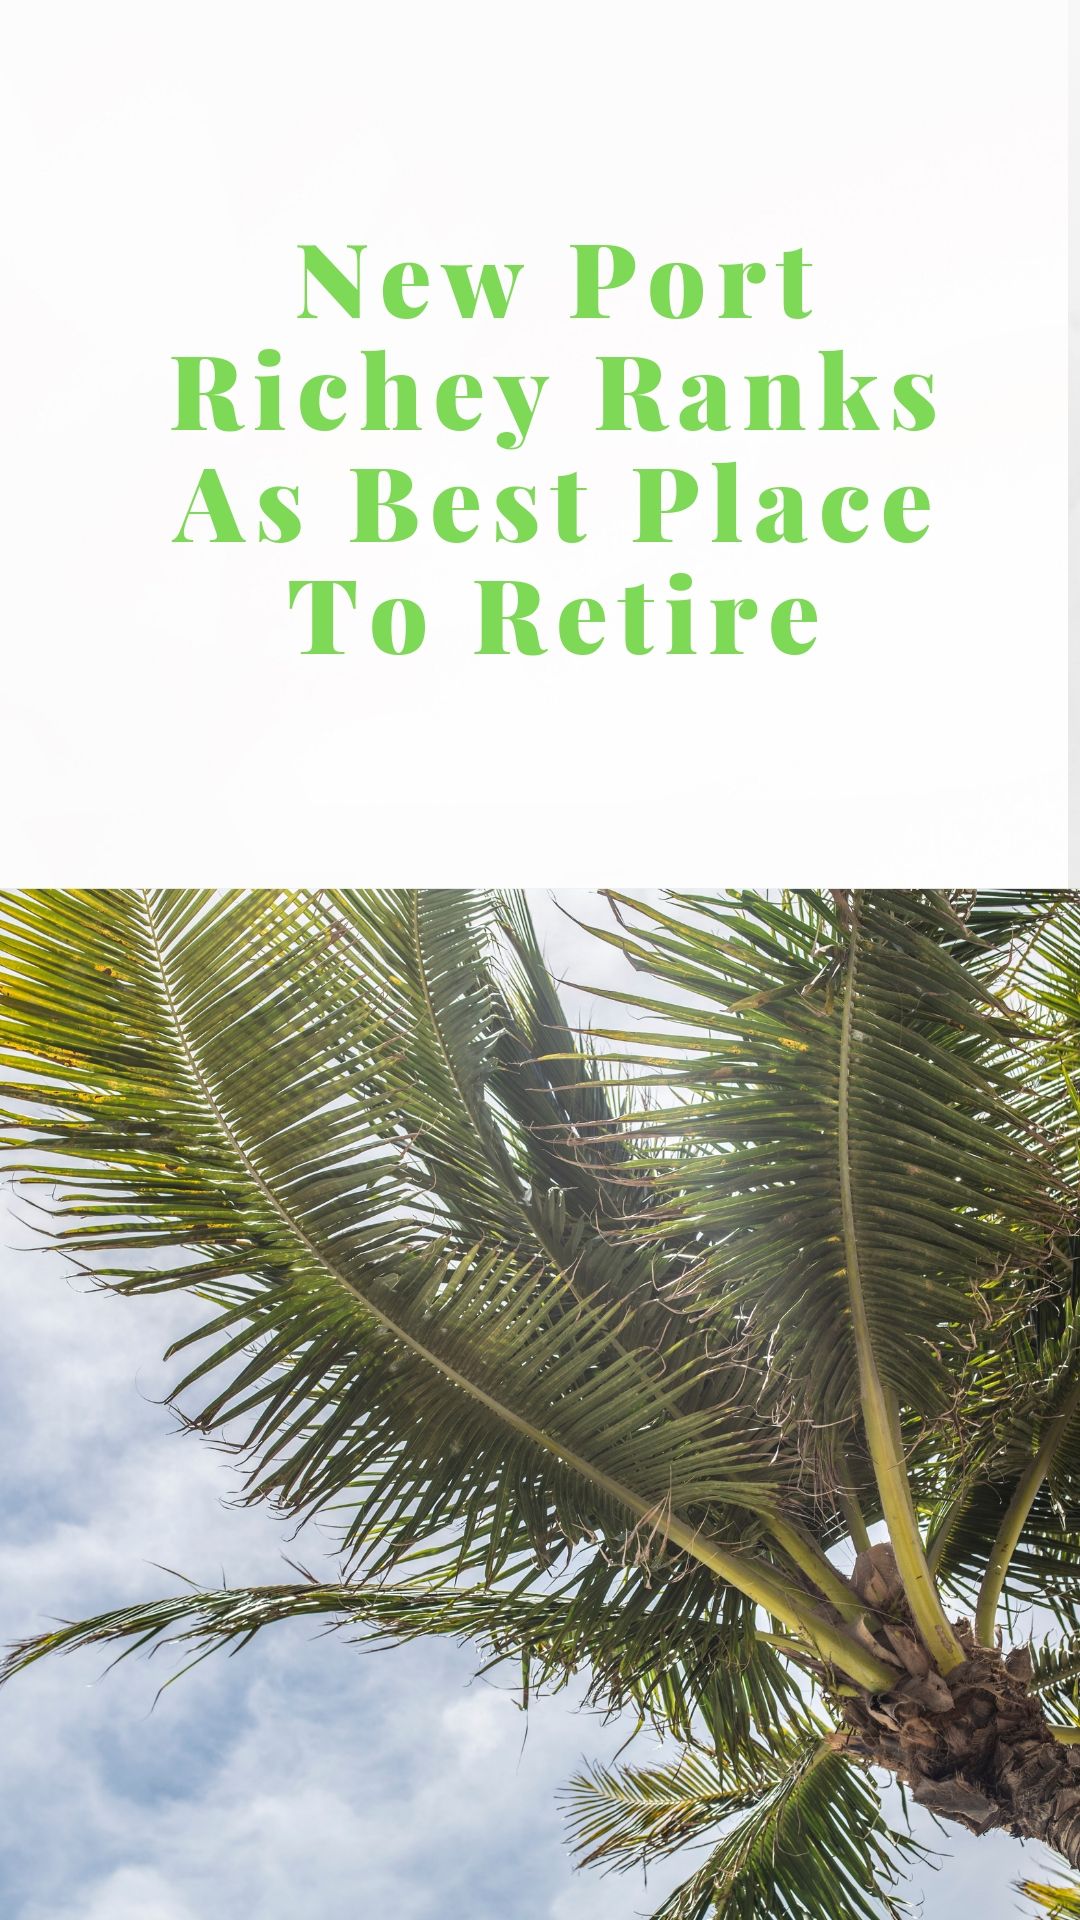 New Port Richey Ranks As Best Place To Retire